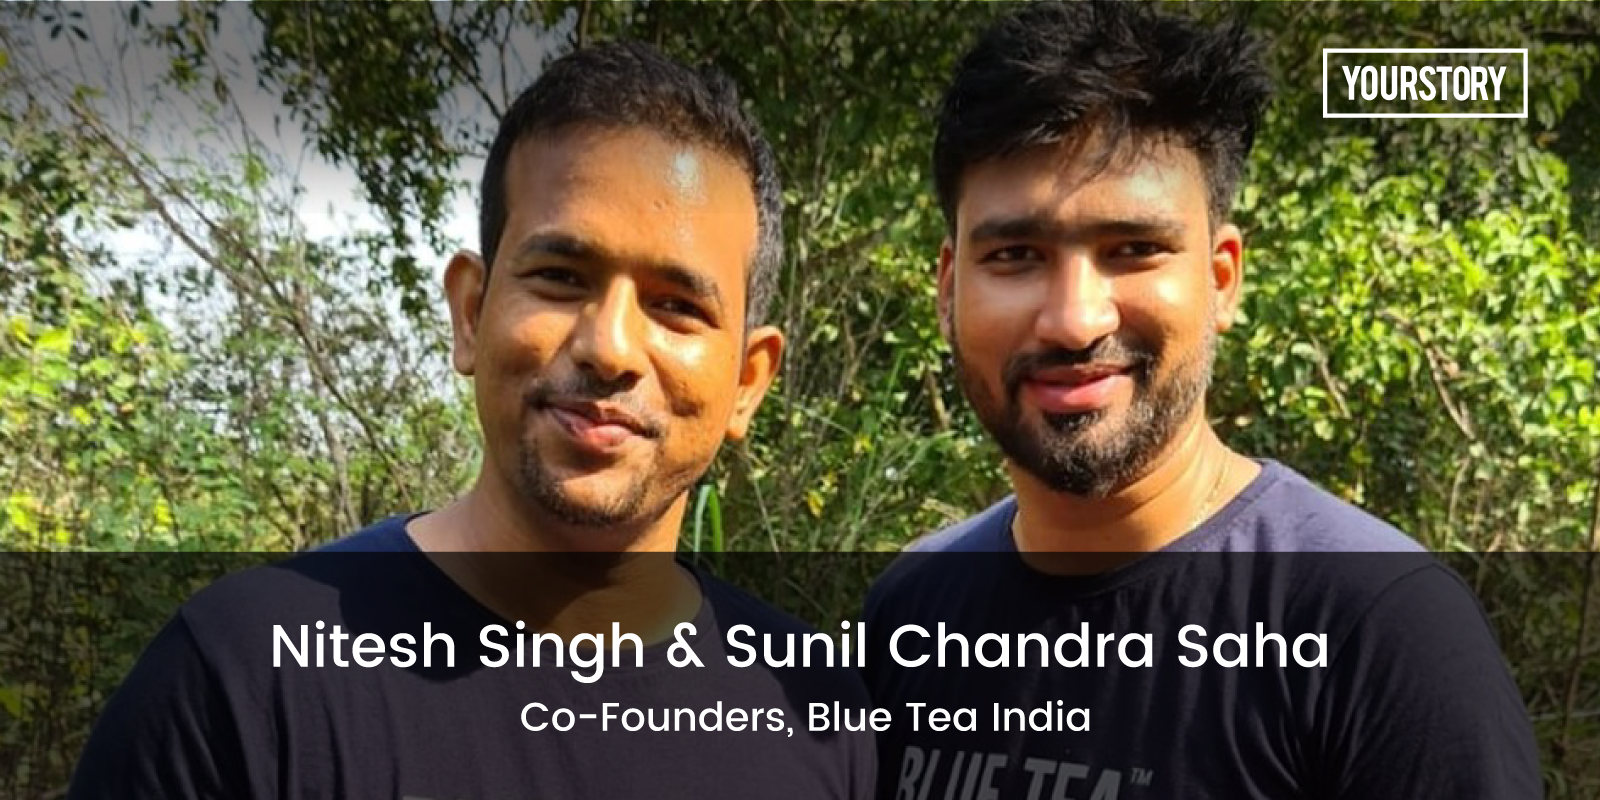 Sip your blues away! This Kolkata-based D2C startup aims to make India synonymous with flower teas